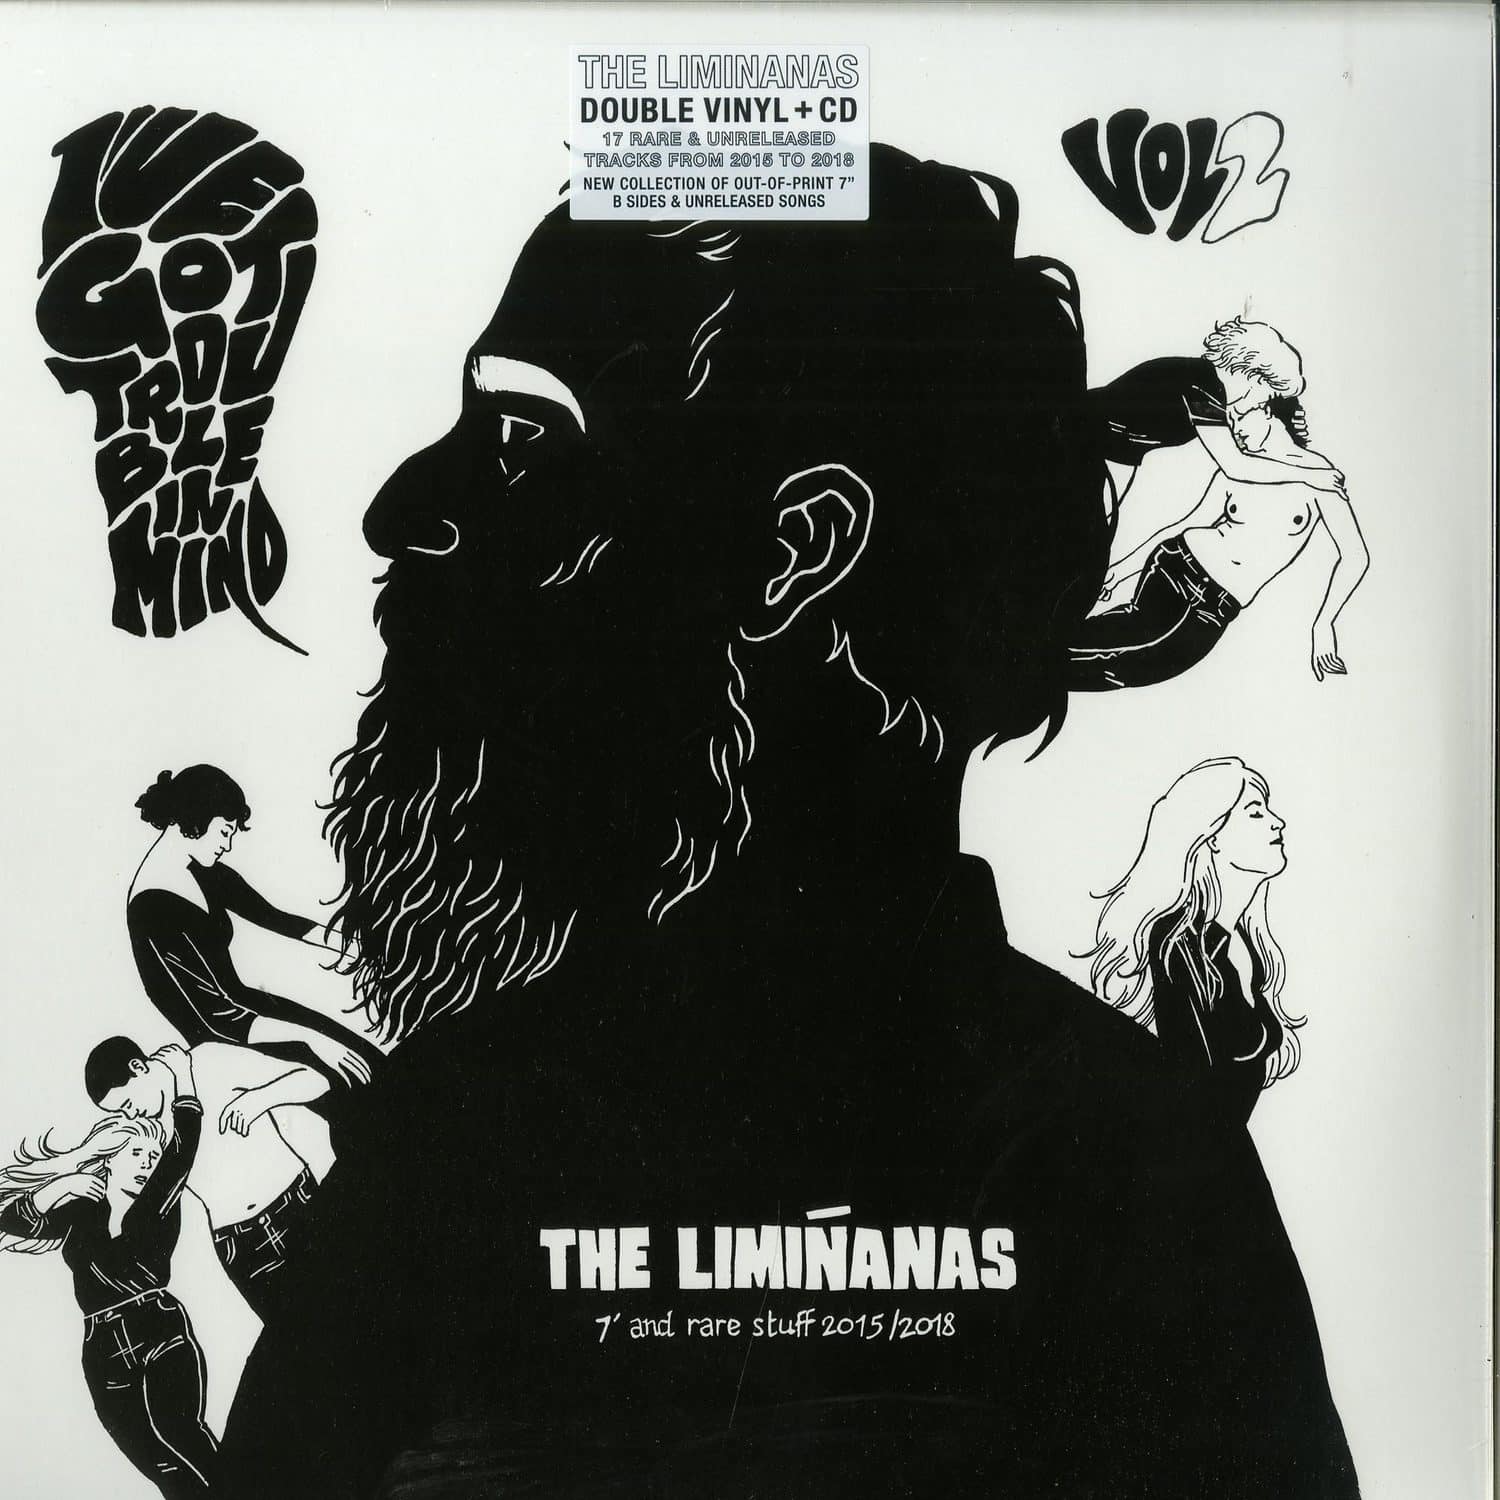 The Liminanas - I VE GOT TROUBLE IN MIND VOL. 2 